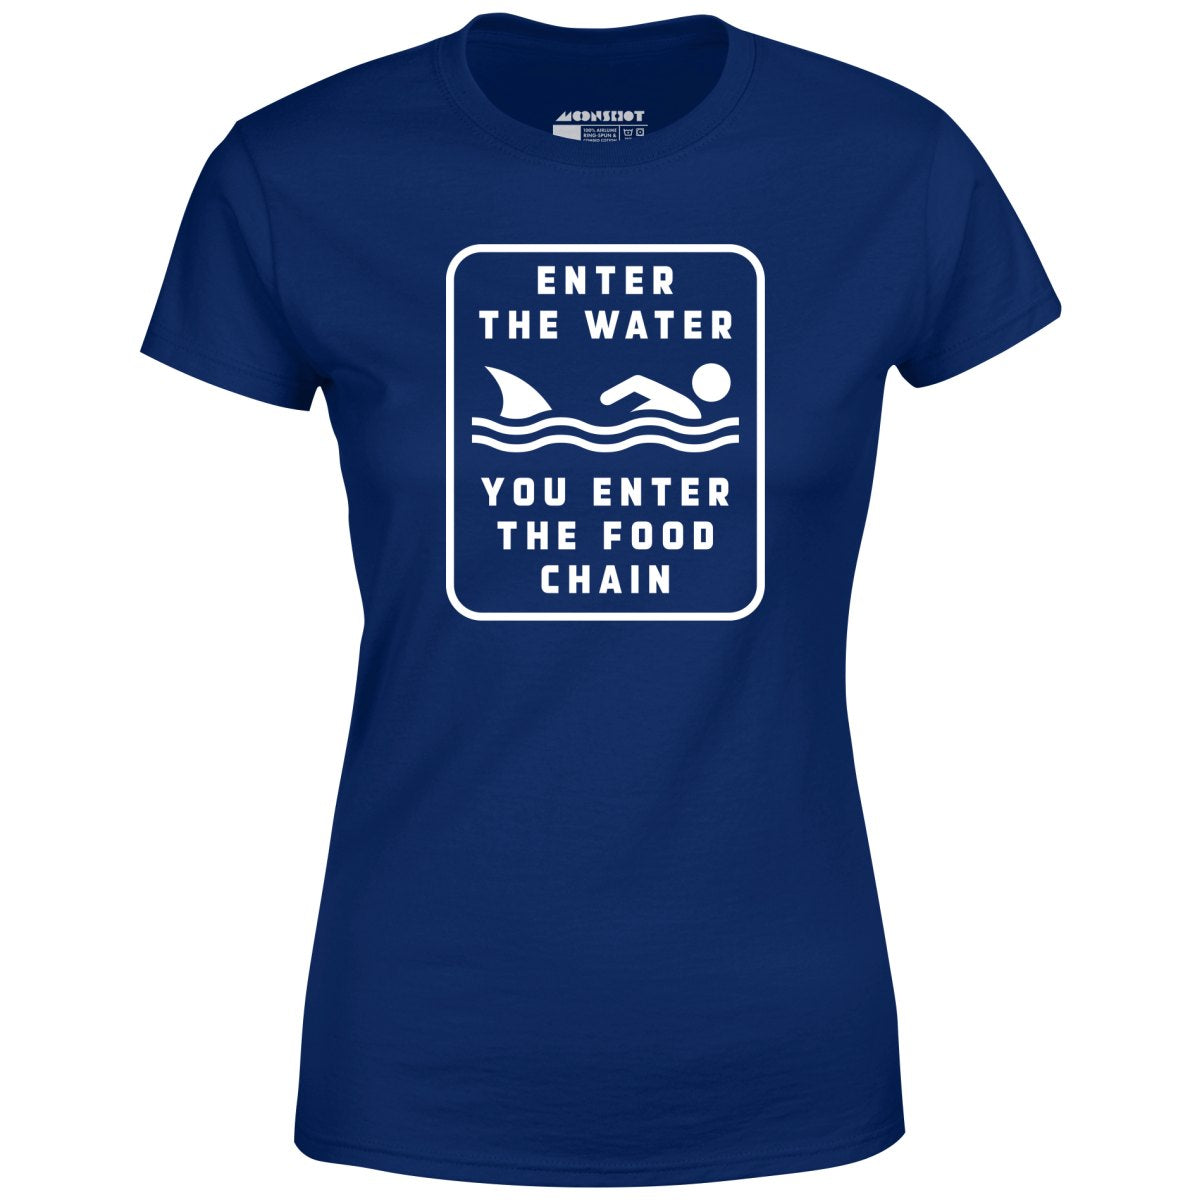 Enter the Water You Enter the Food Chain - Women's T-Shirt